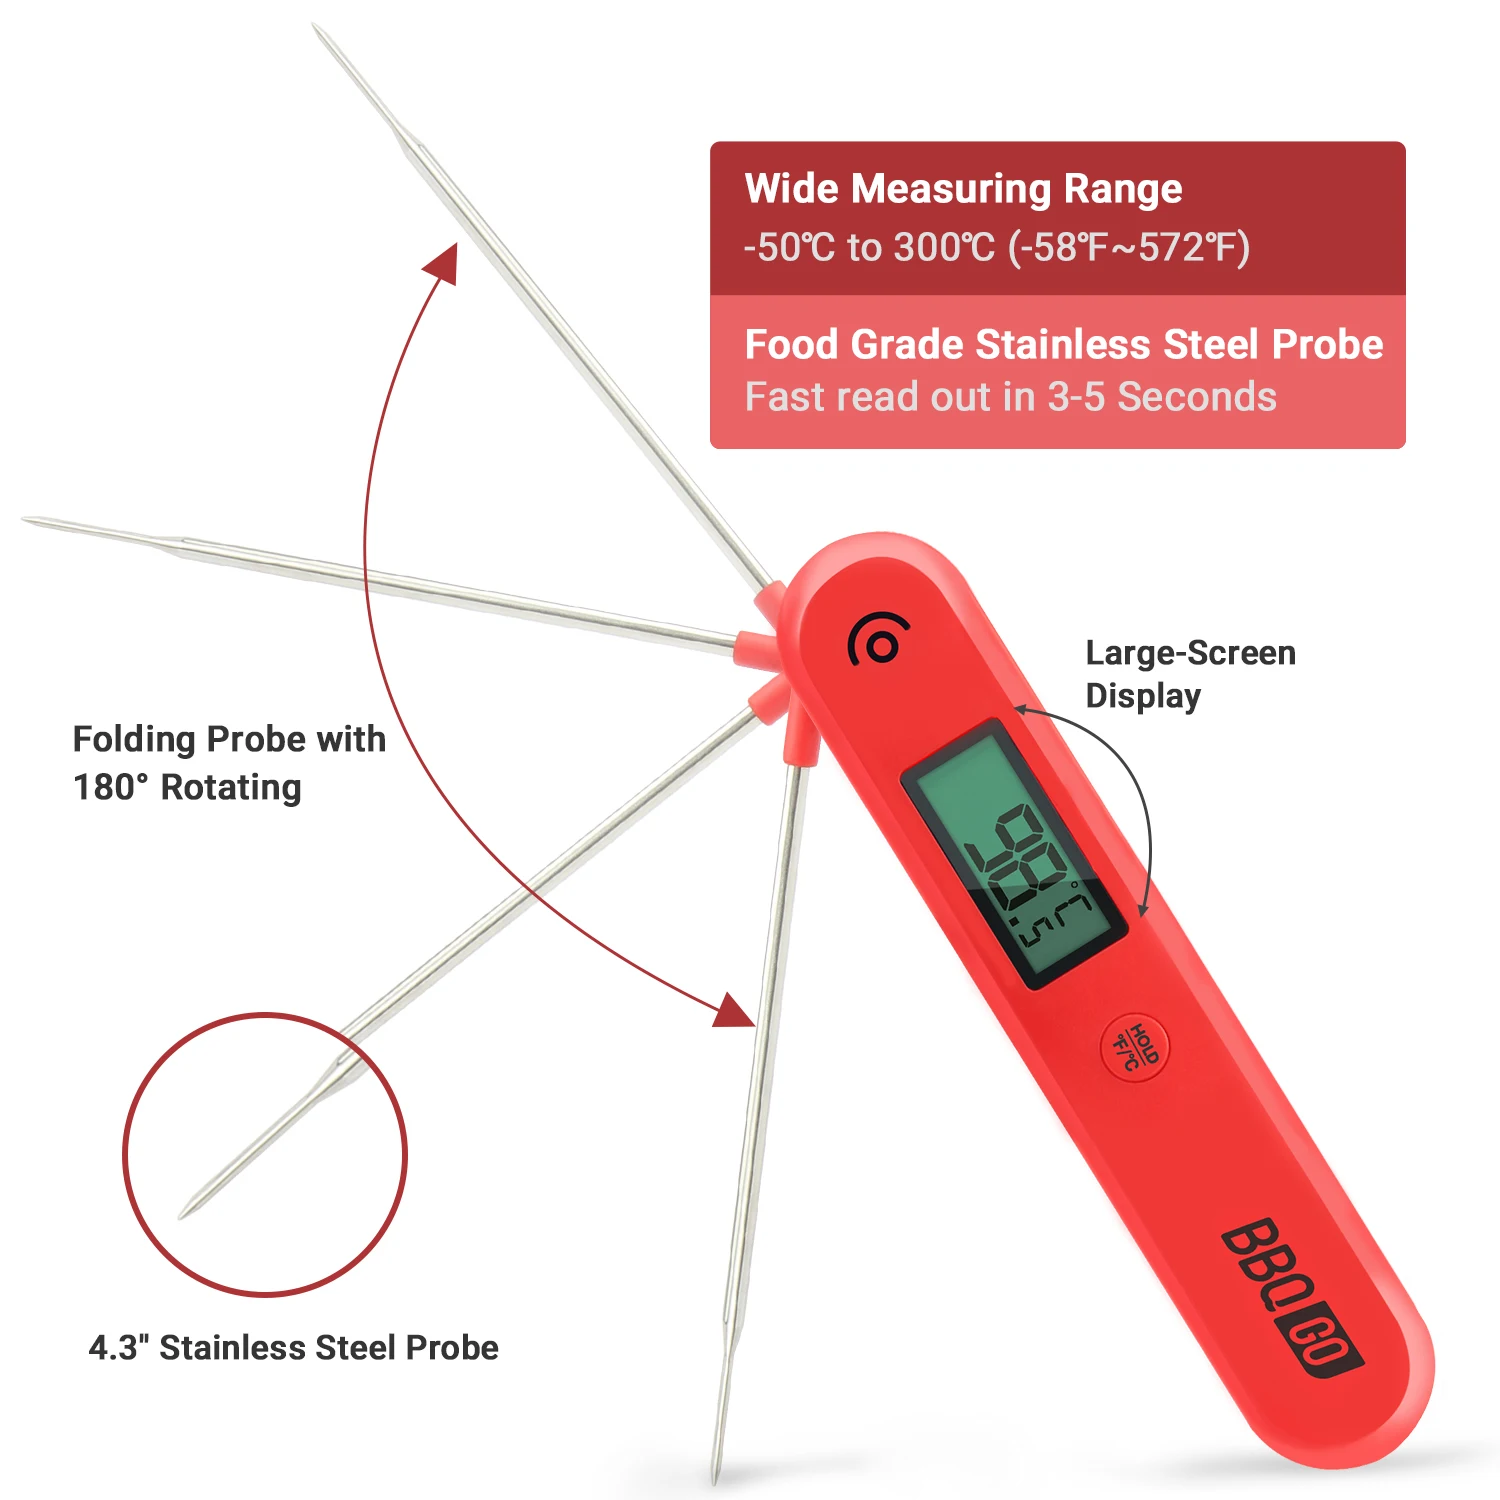 https://ae01.alicdn.com/kf/H7c3e14d22d264c1eb5aac0140ac241ceG/INKBIRD-Portable-Meat-Thermometer-Kitchen-Digital-Cooking-Food-Probe-Electronic-BBQ-Grill-Cooking-Tool-Temperature-Meter.jpg